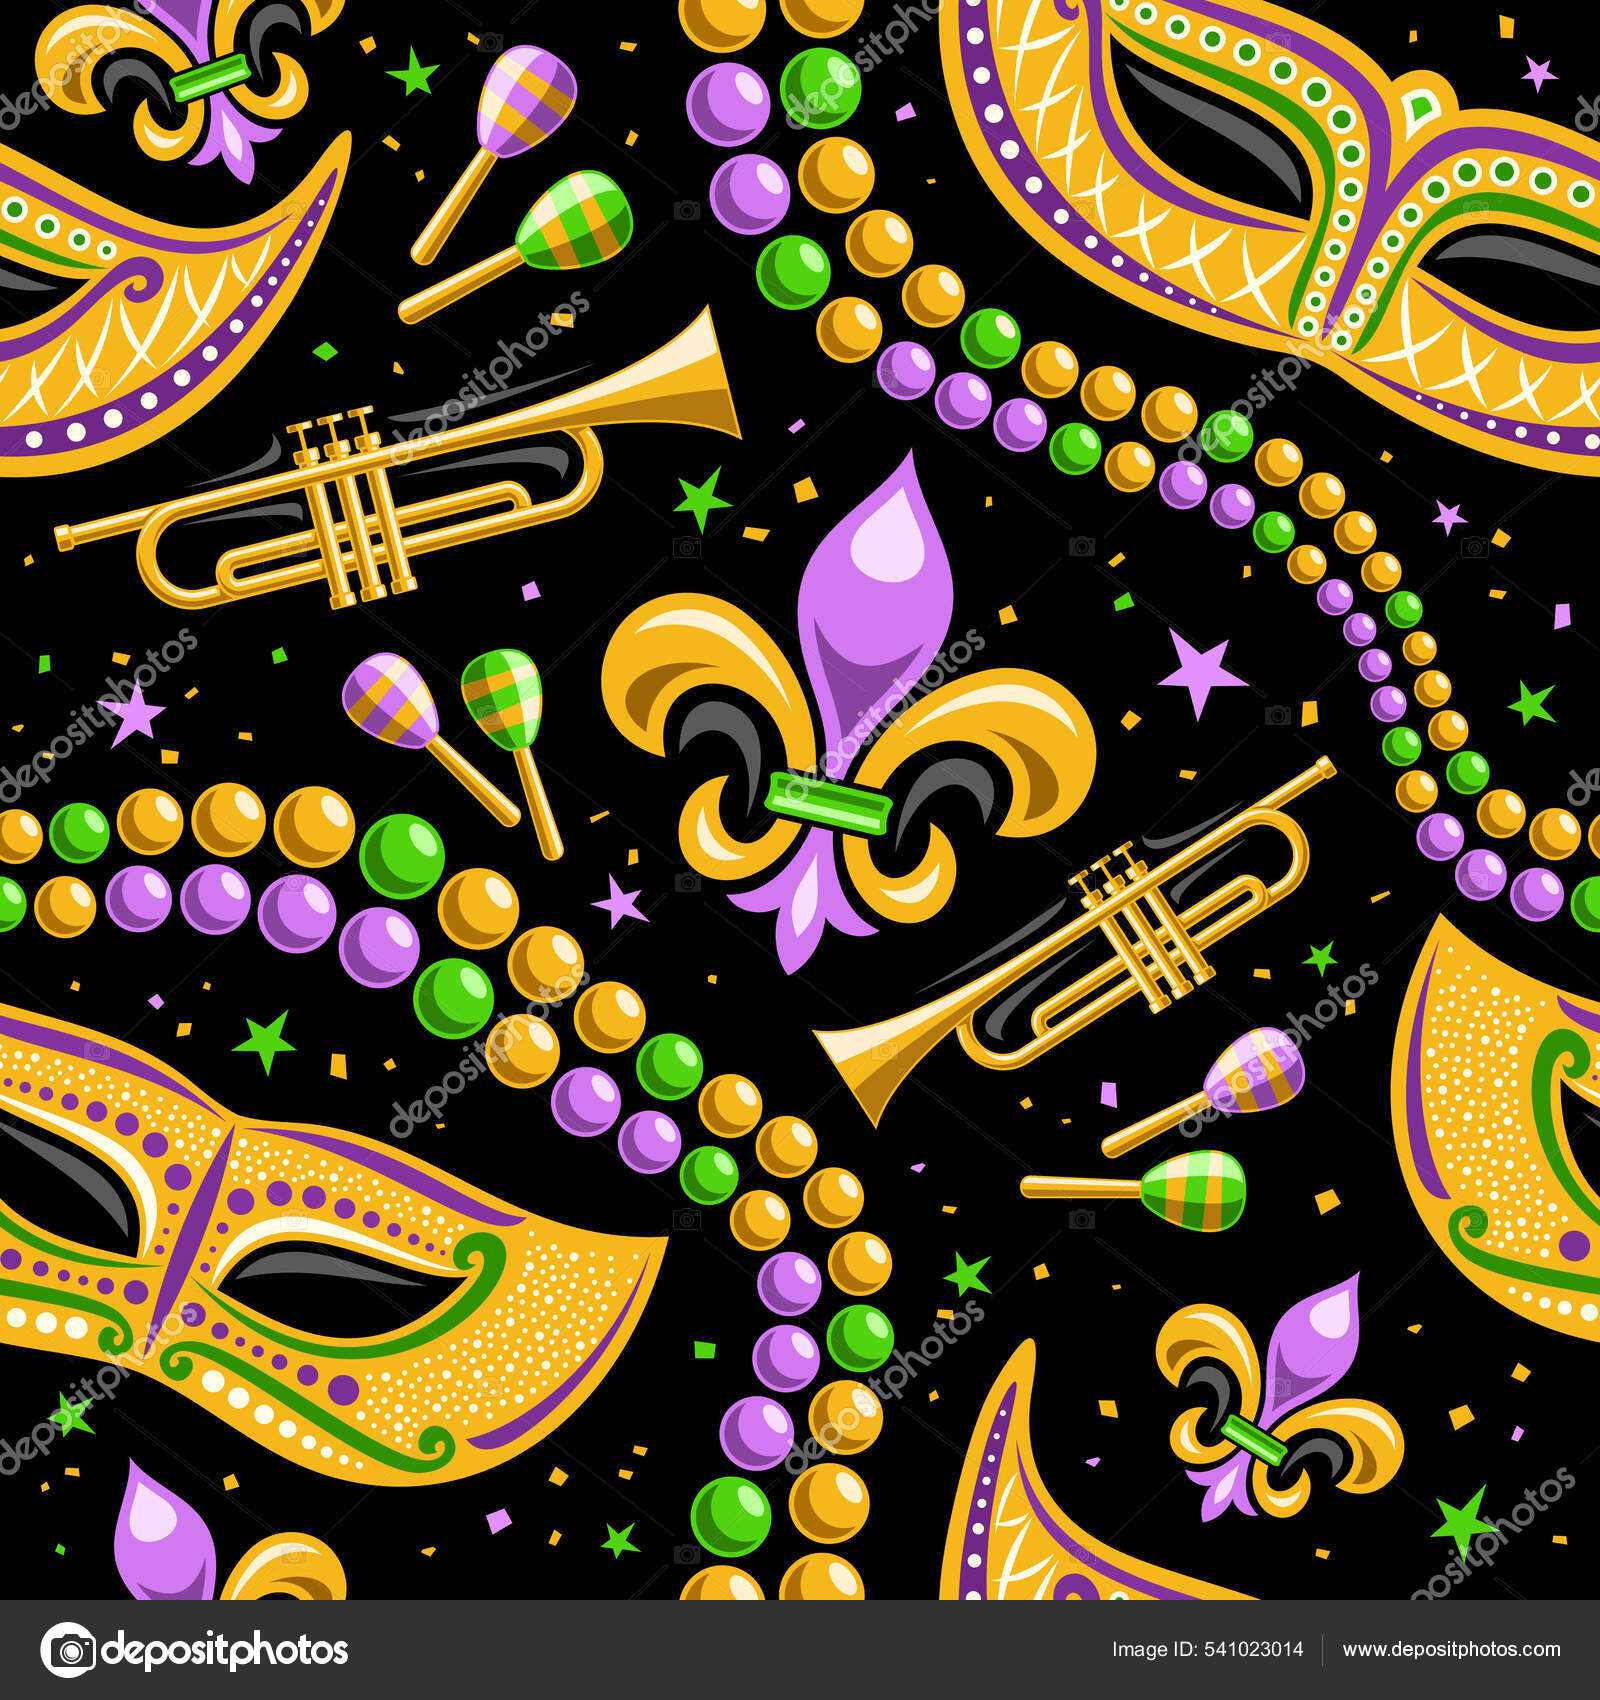 Mardi Gras Beads Vector PNG Images, Illustration With Beads And Feathers  Mardi Gras, Feather, Brazilian, Border PNG Image For Free Download